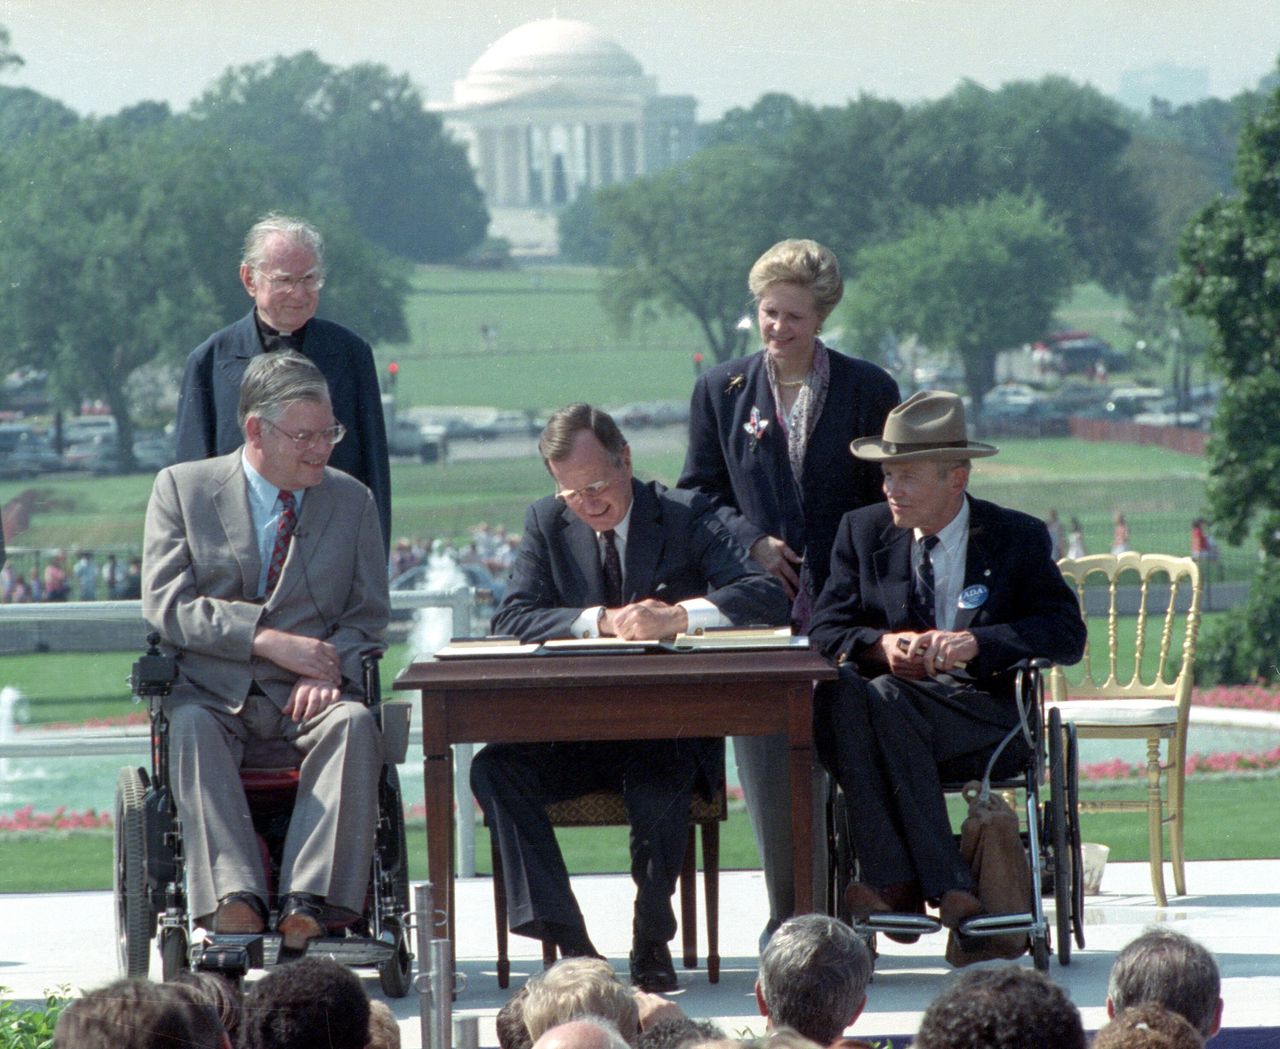 President George H.W. Bush signs the Americans With Disabilities Act on the South Lawn of the White House on July 26, 1990. With him are the Rev. Harold Wilke (rear left), Evan Kemp, chair of the Equal Opportunity Employment Commission (left), Sandra Parrino, chair of the National Council on Disability, and Justin Dart, chair of The President's Council on Disabilities. Jefferson Memorial is in the background.